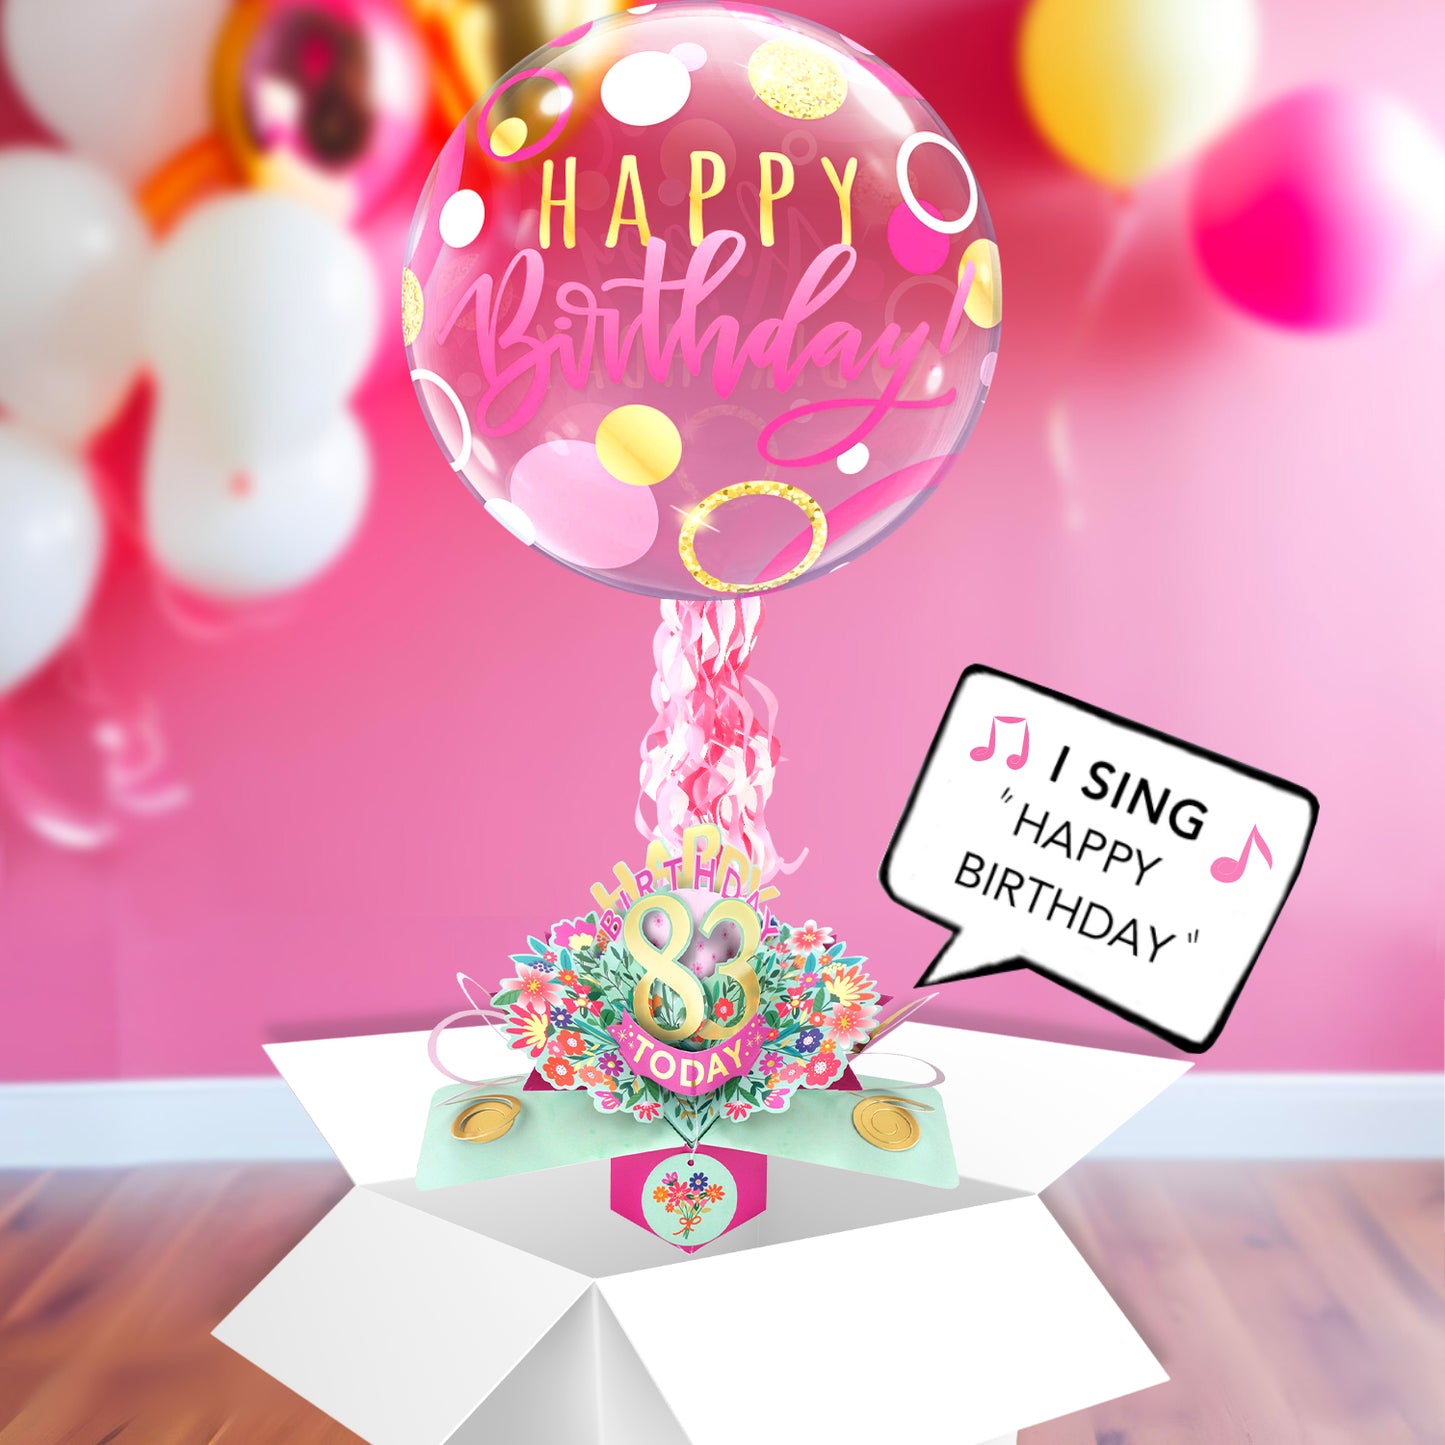 83rd Birthday Pop Up Card & Musical Balloon Surprise Delivered In A Box For Her